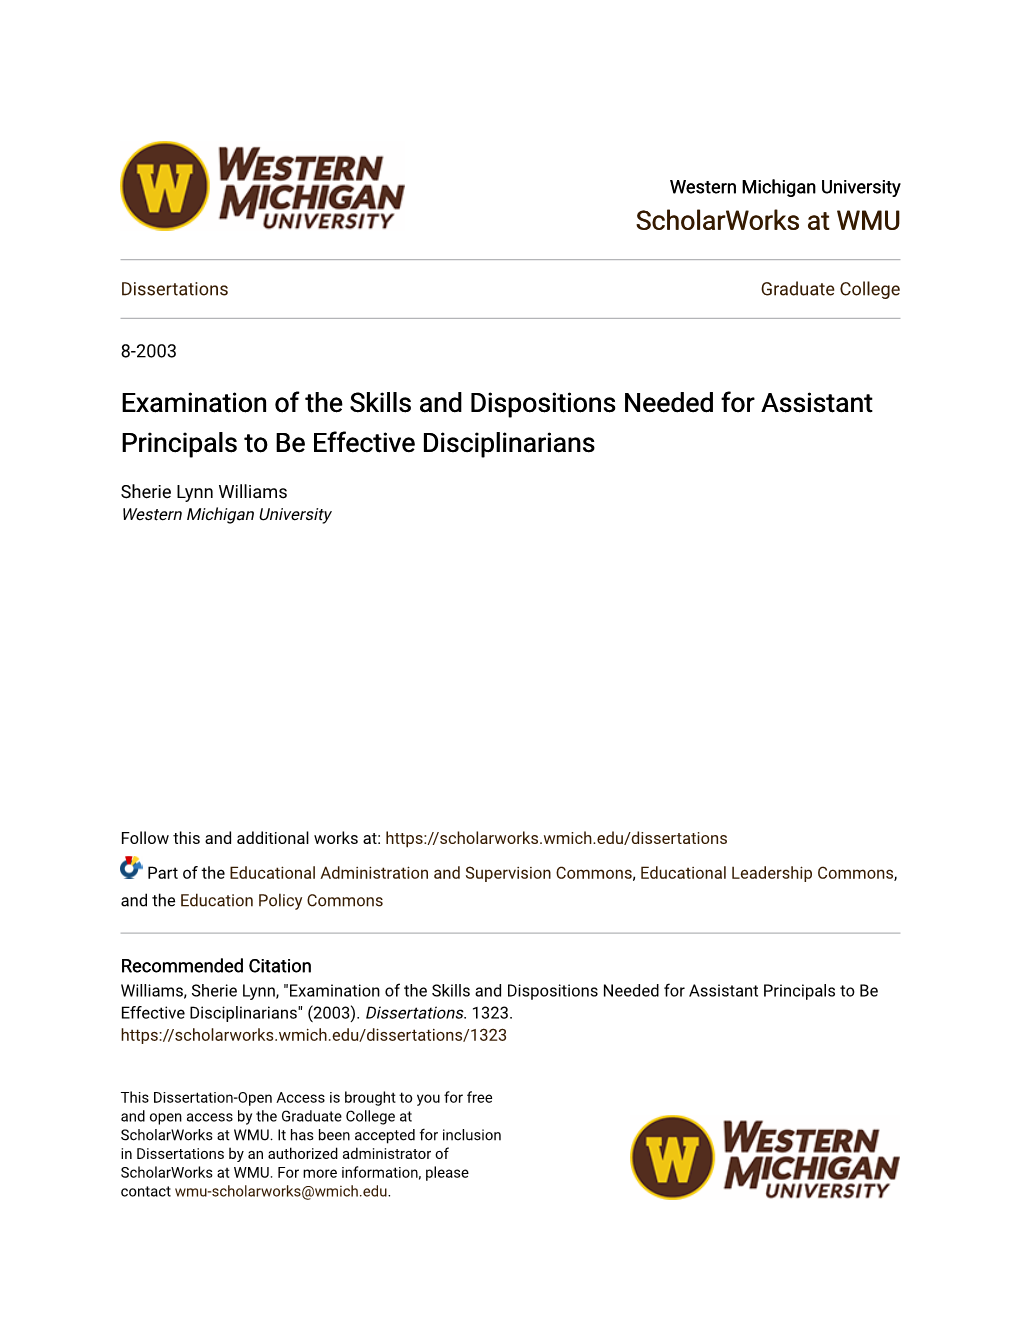 Examination of the Skills and Dispositions Needed for Assistant Principals to Be Effective Disciplinarians